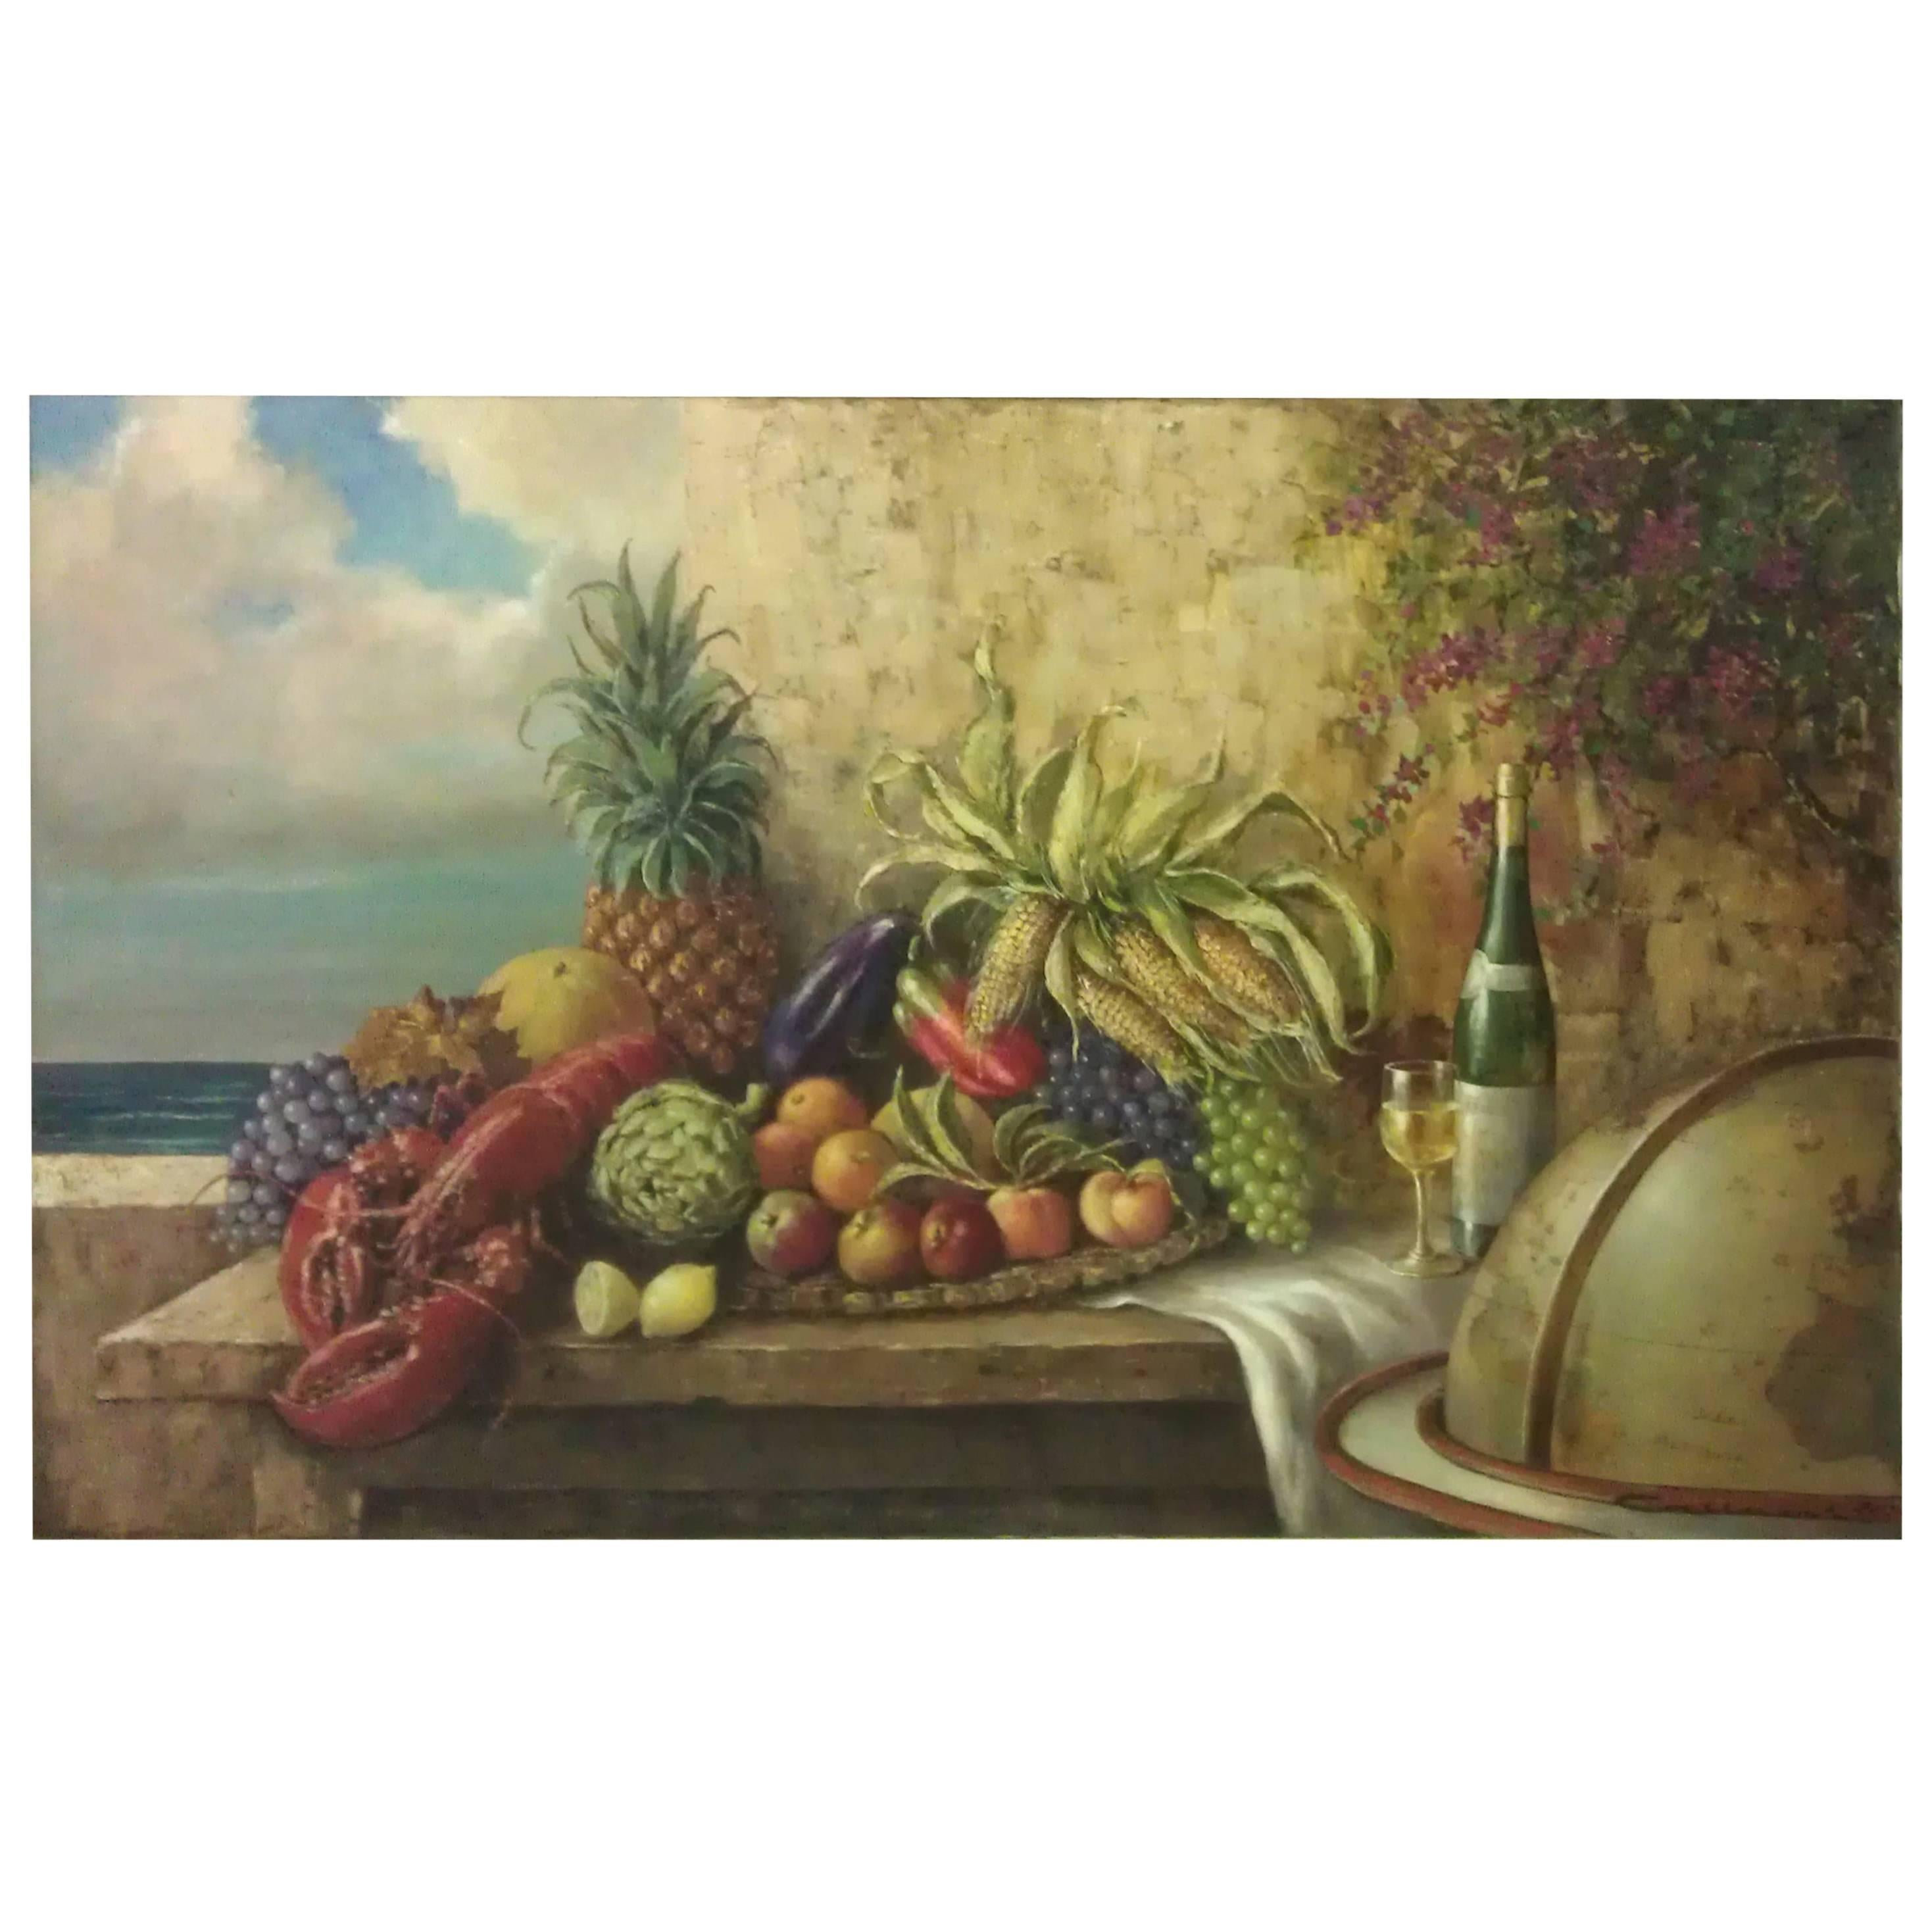 Irresistible Huge Still Life OIl Painting Jacques Callaert, Belgian Artist signd For Sale